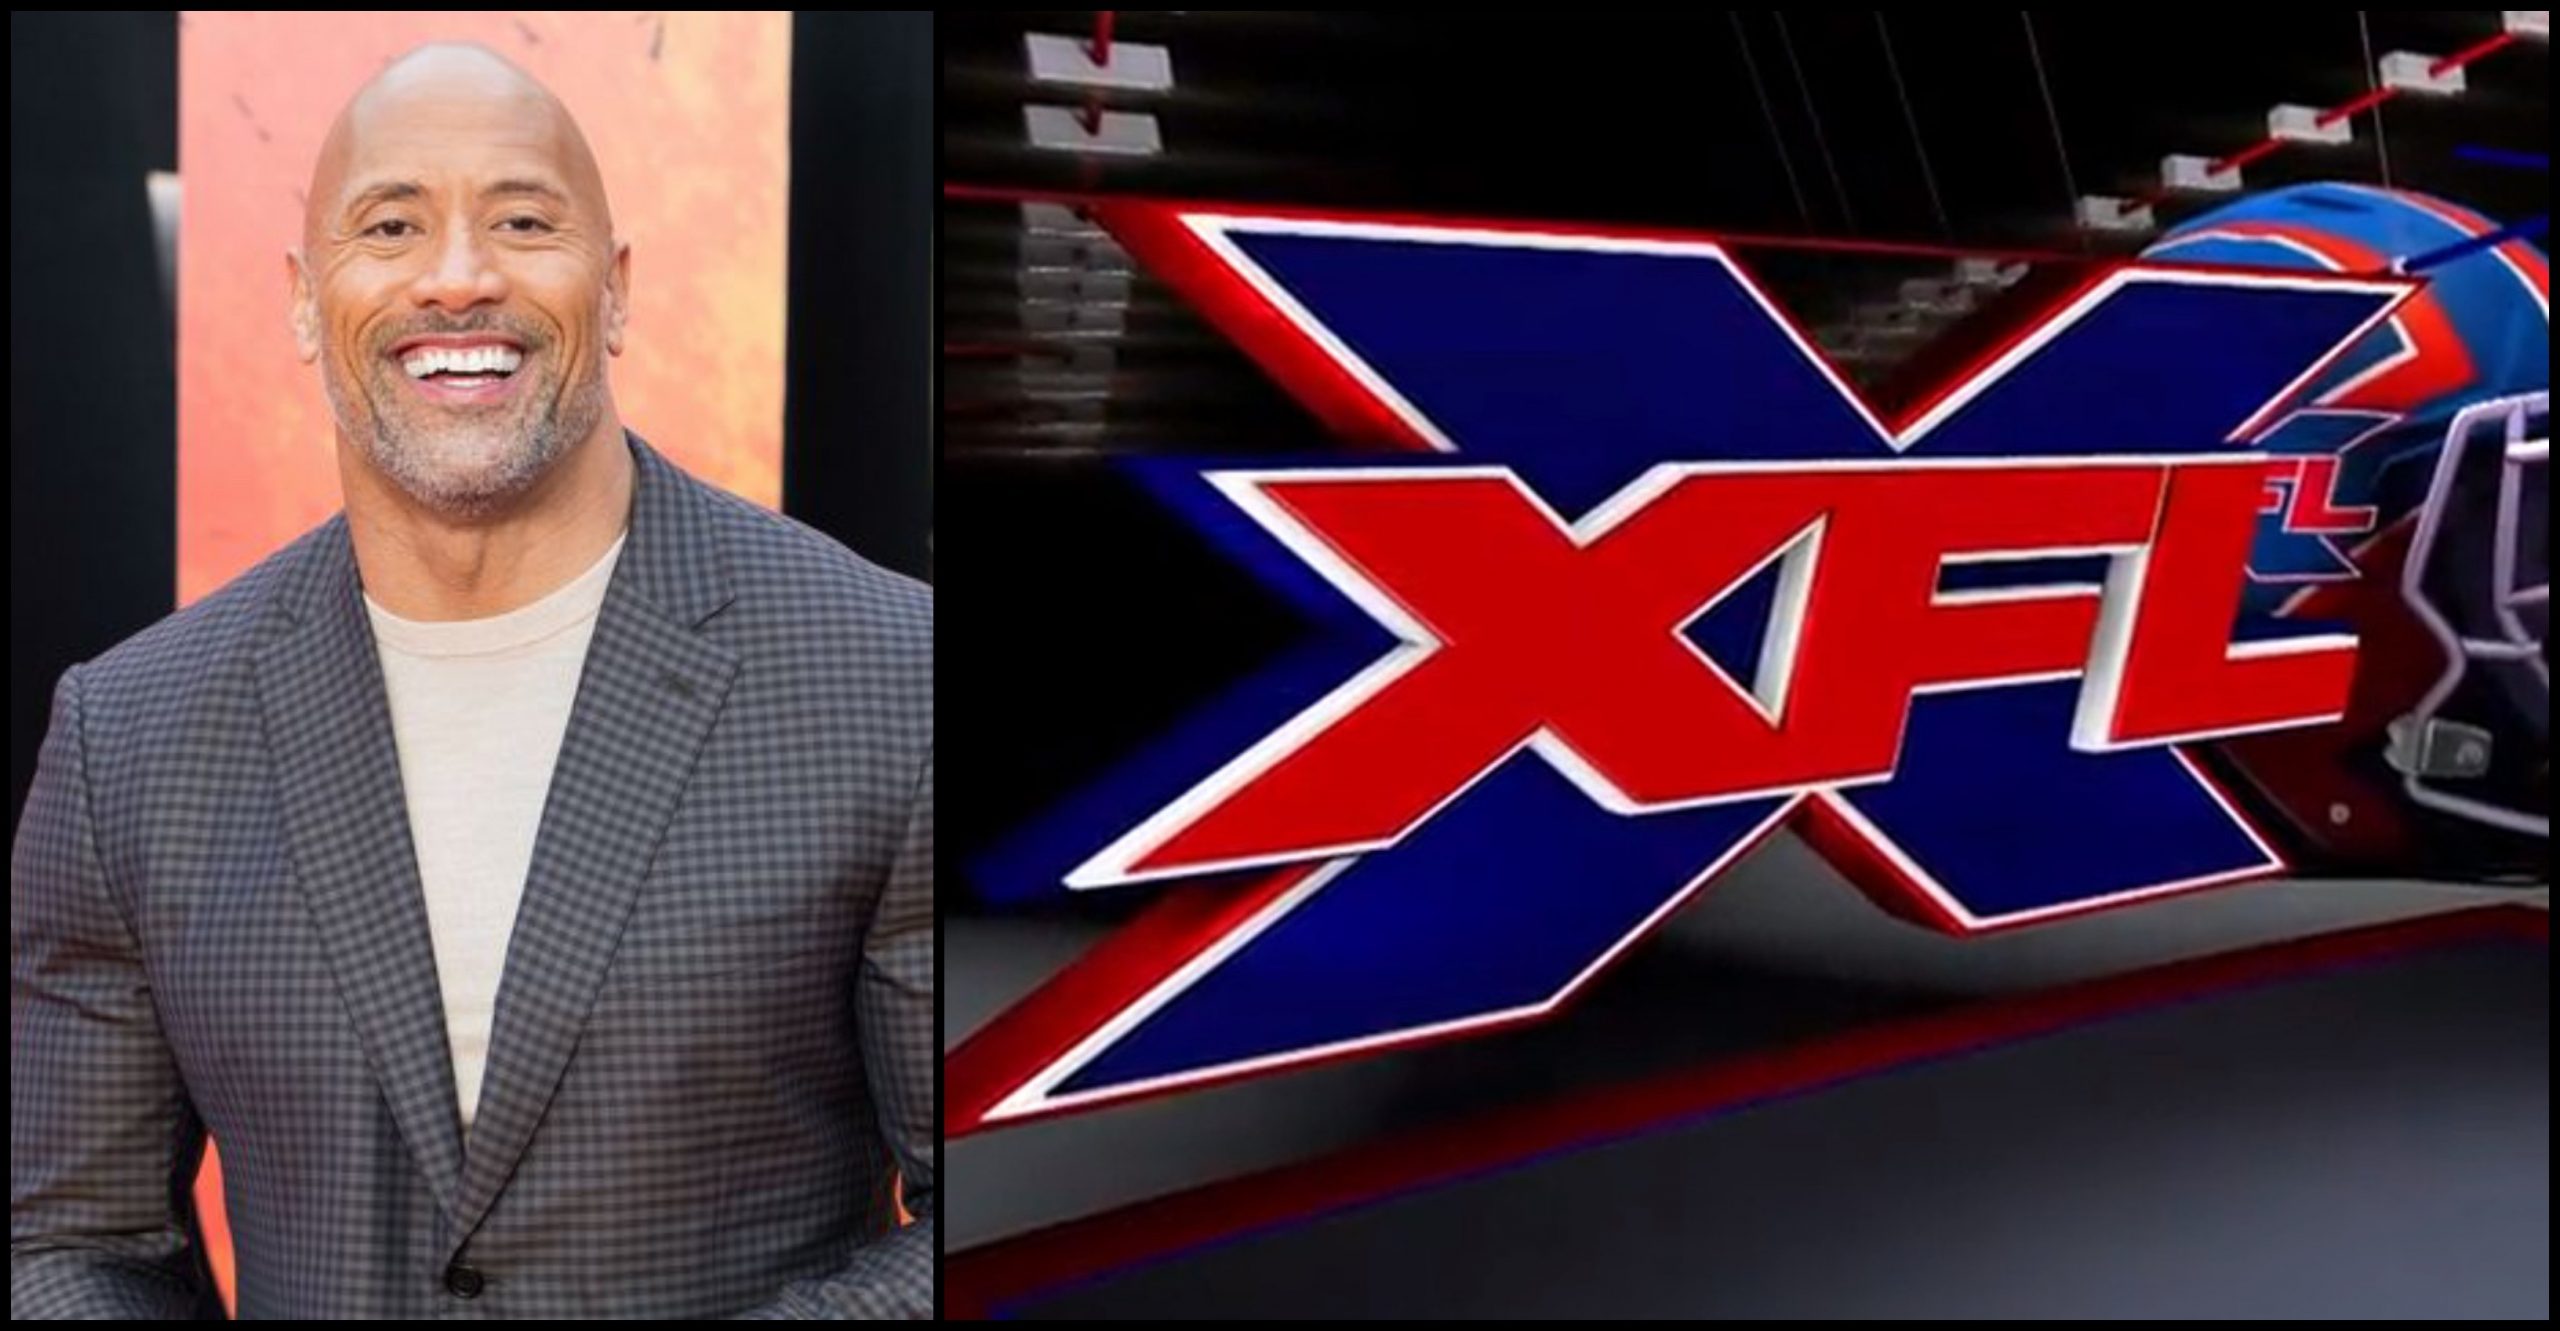 Dwayne “The Rock” Johnson Buys Out Bankrupt XFL with Partners